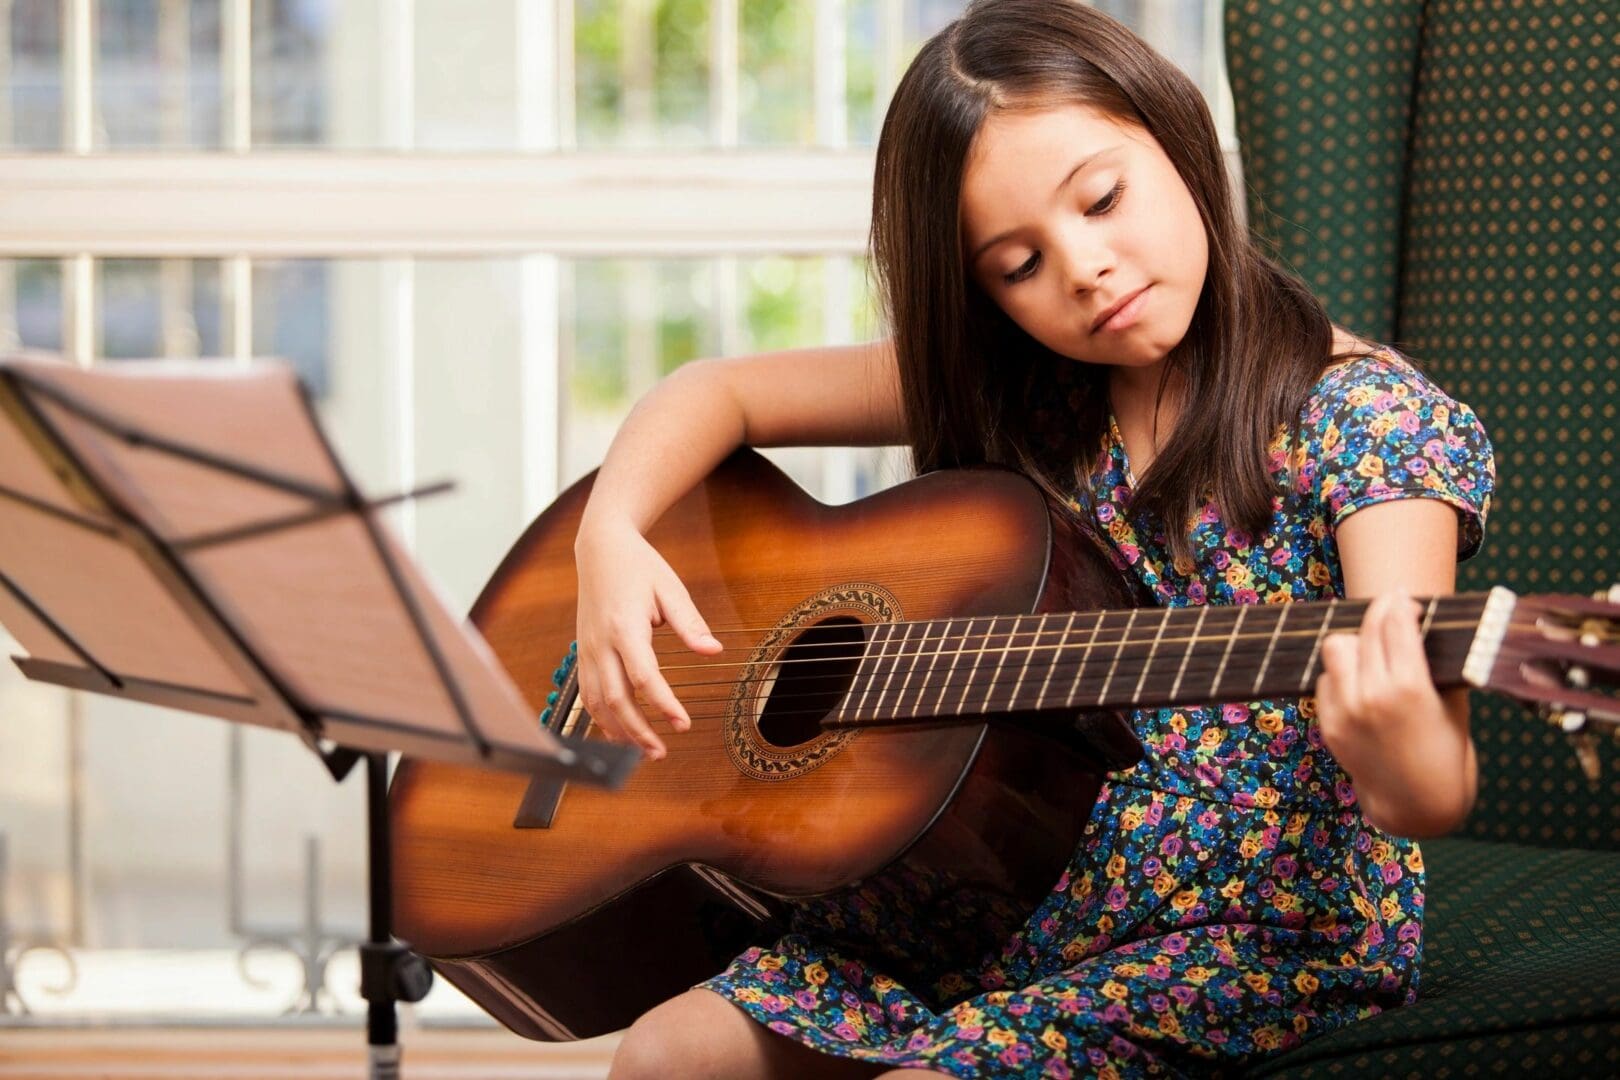 A girl is playing an acoustic guitar